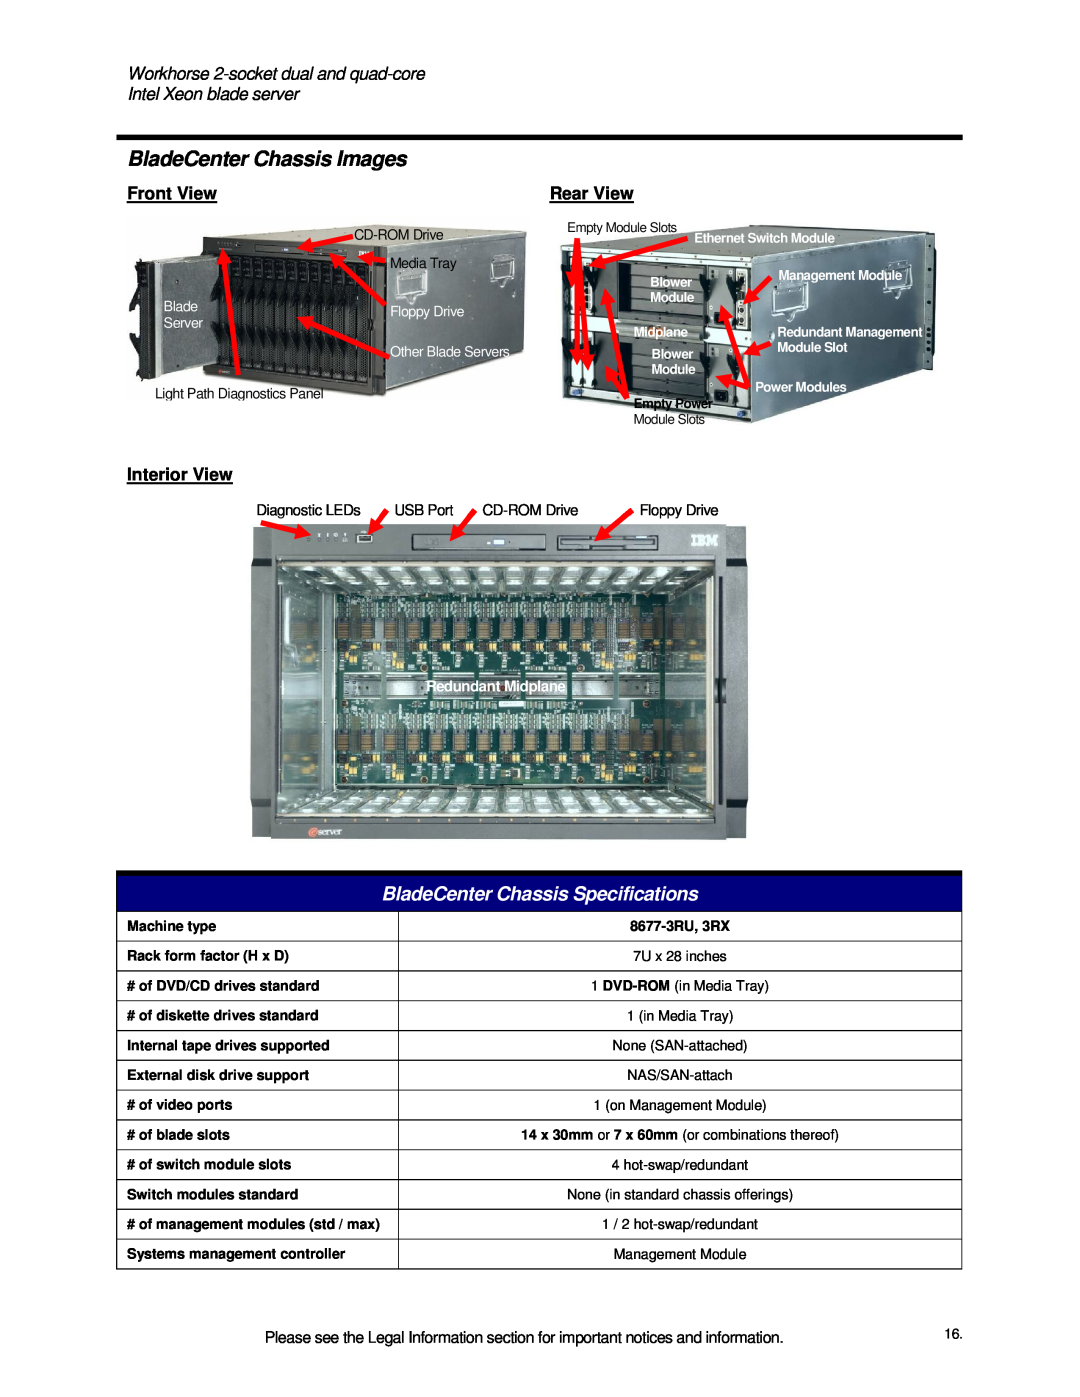 IBM HS21 BladeCenter Chassis Images, BladeCenter Chassis Specifications, Front View, Interior View, Rear View, Server 